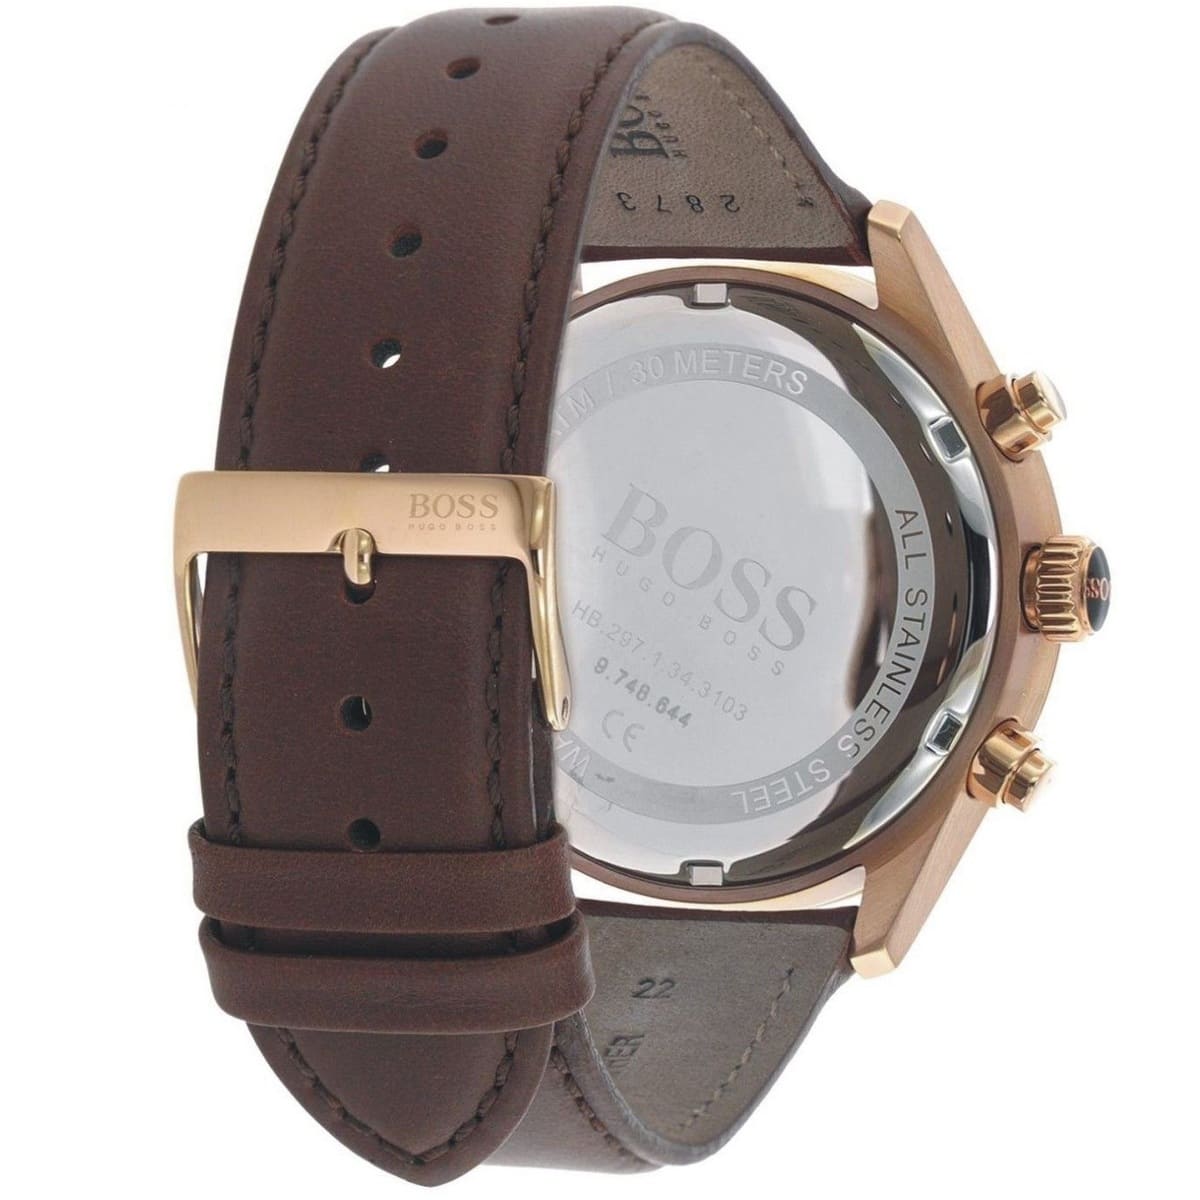 Hugo Boss Men’s Chronograph Leather Strap Brown Dial 44mm Watch 1513605